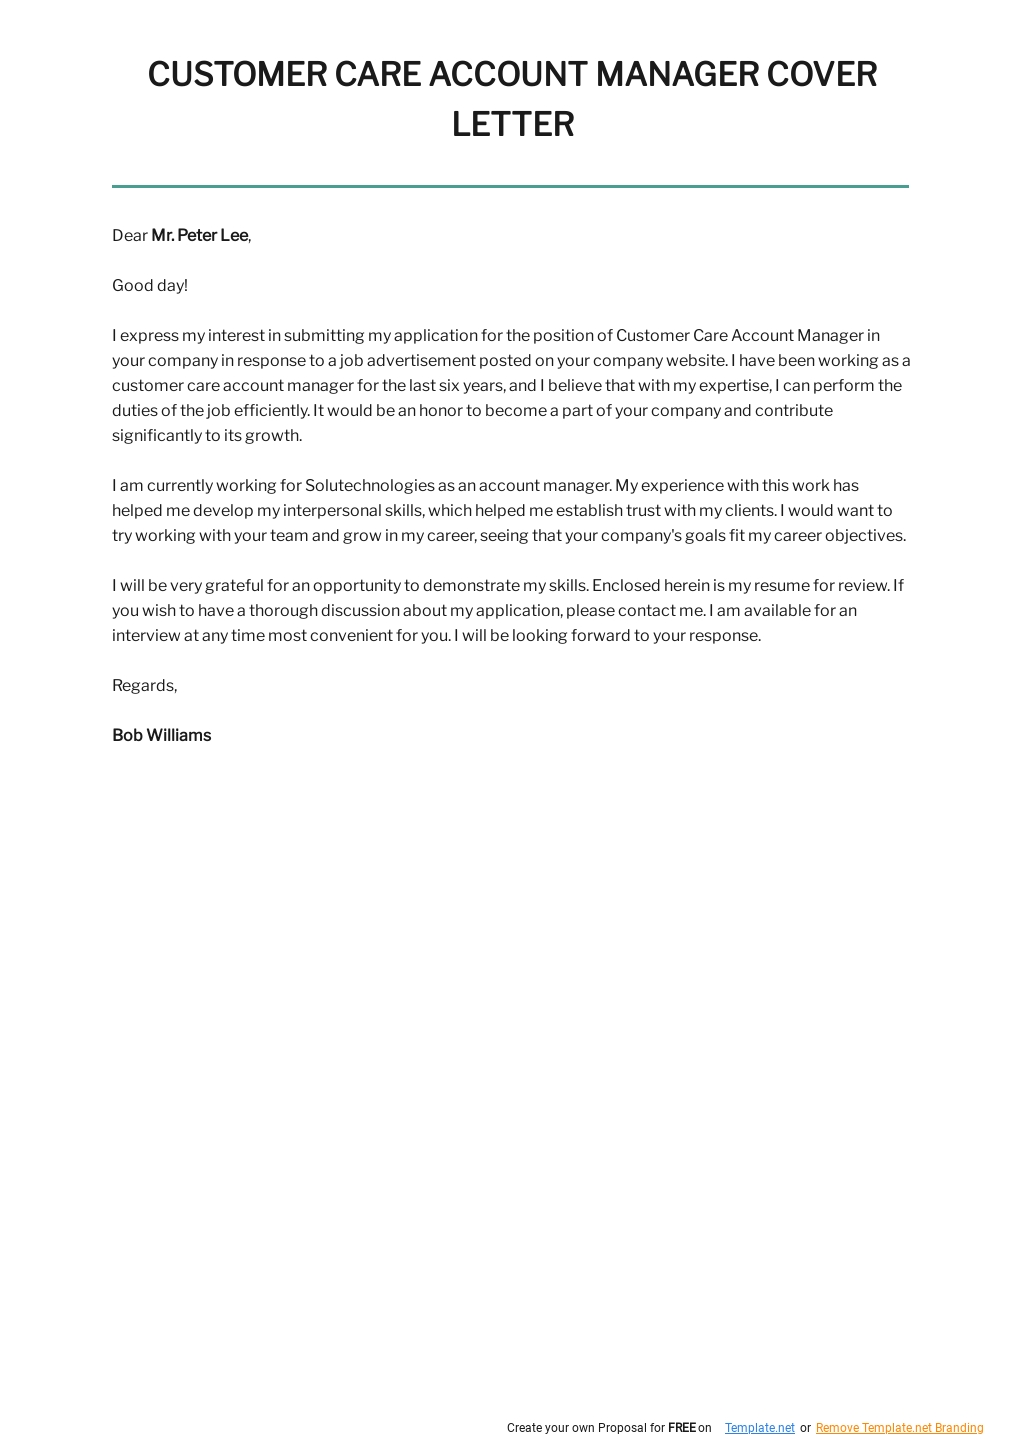 Free Customer Care Account Manager Cover Letter Template.jpe